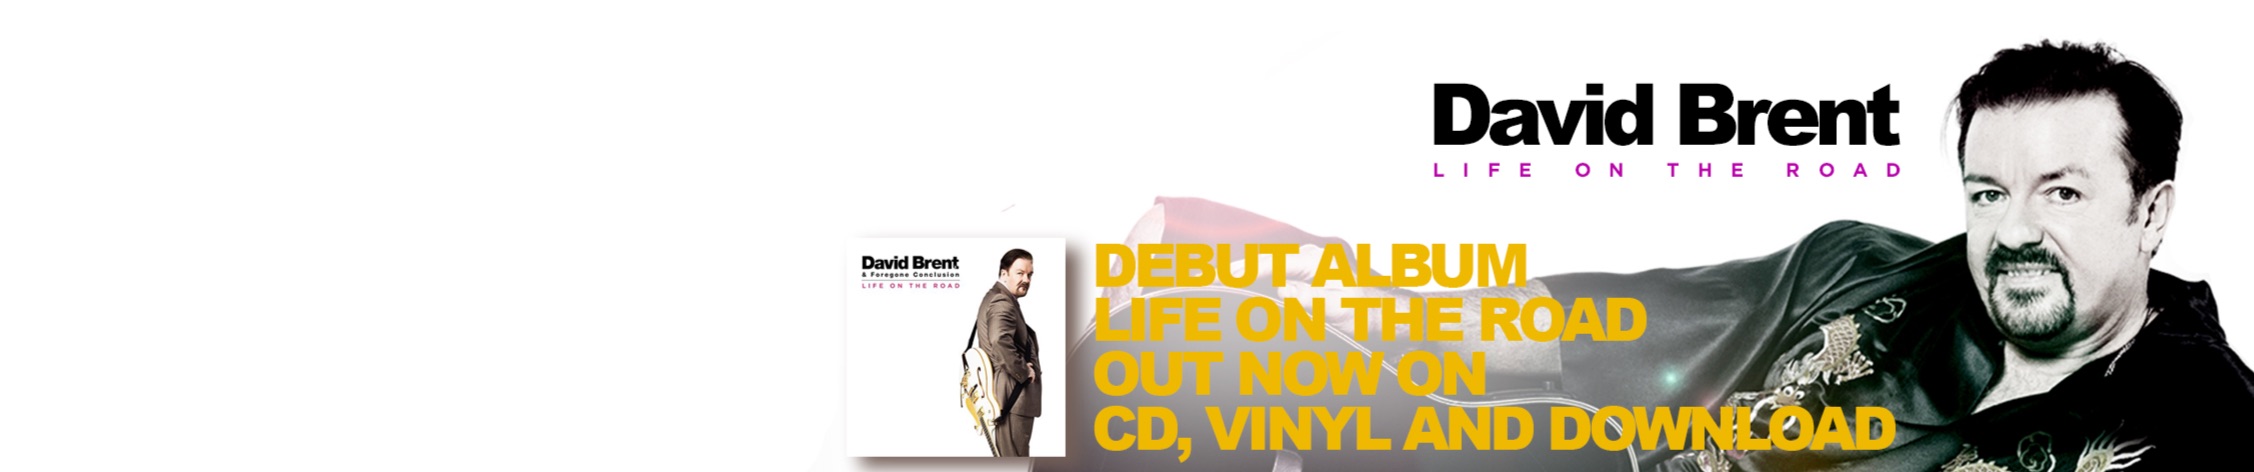 Stream David Brent & Foregone Conclusion music | to songs, playlists for free on SoundCloud